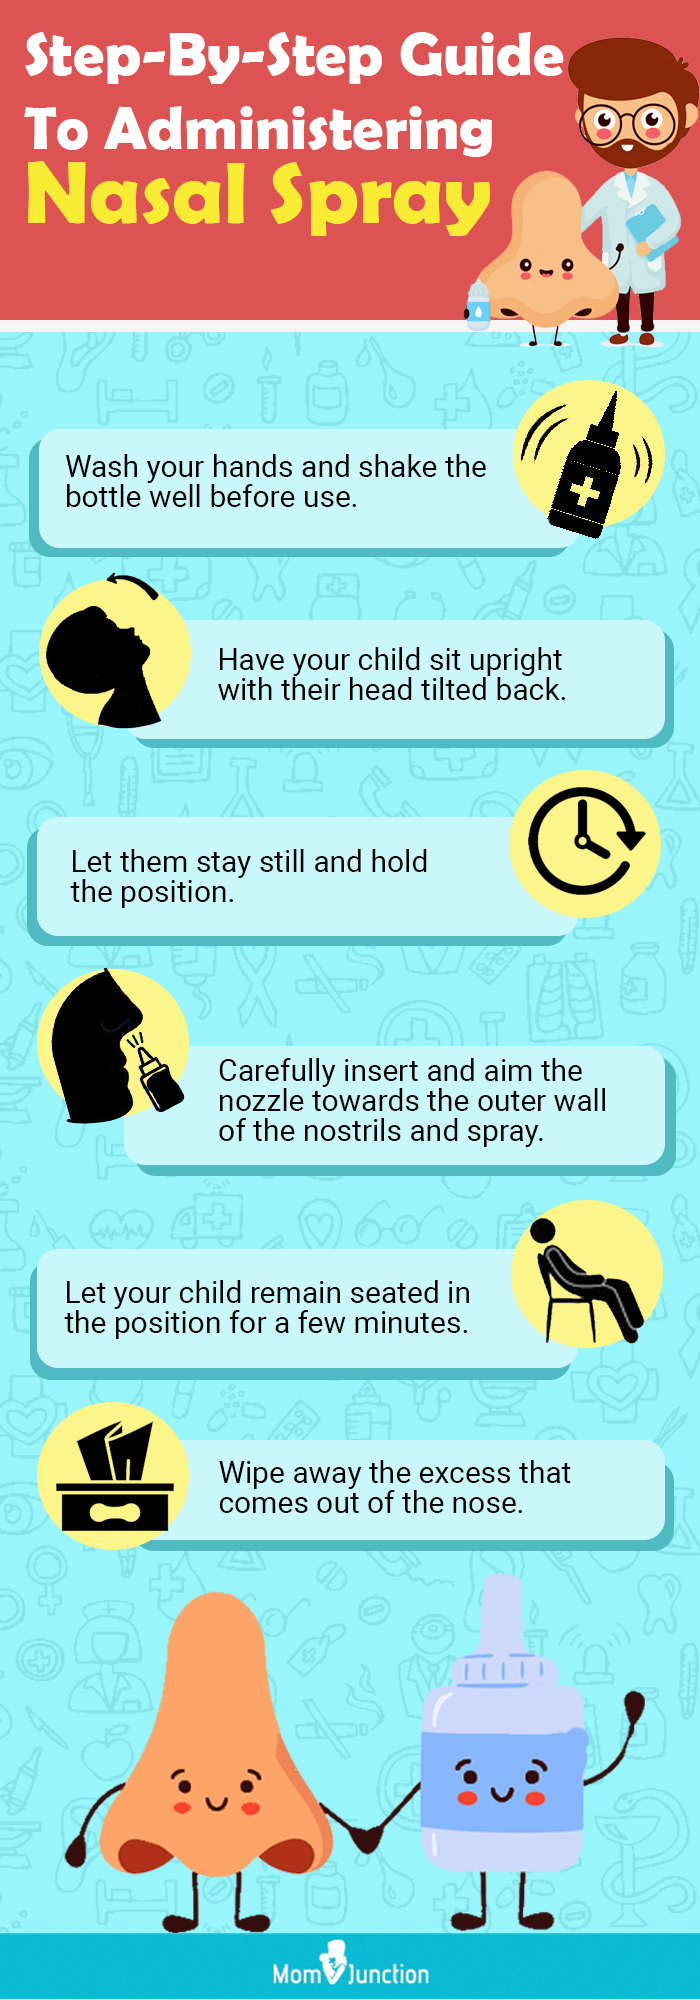 step by step guide to administering nasal spray (infographic)